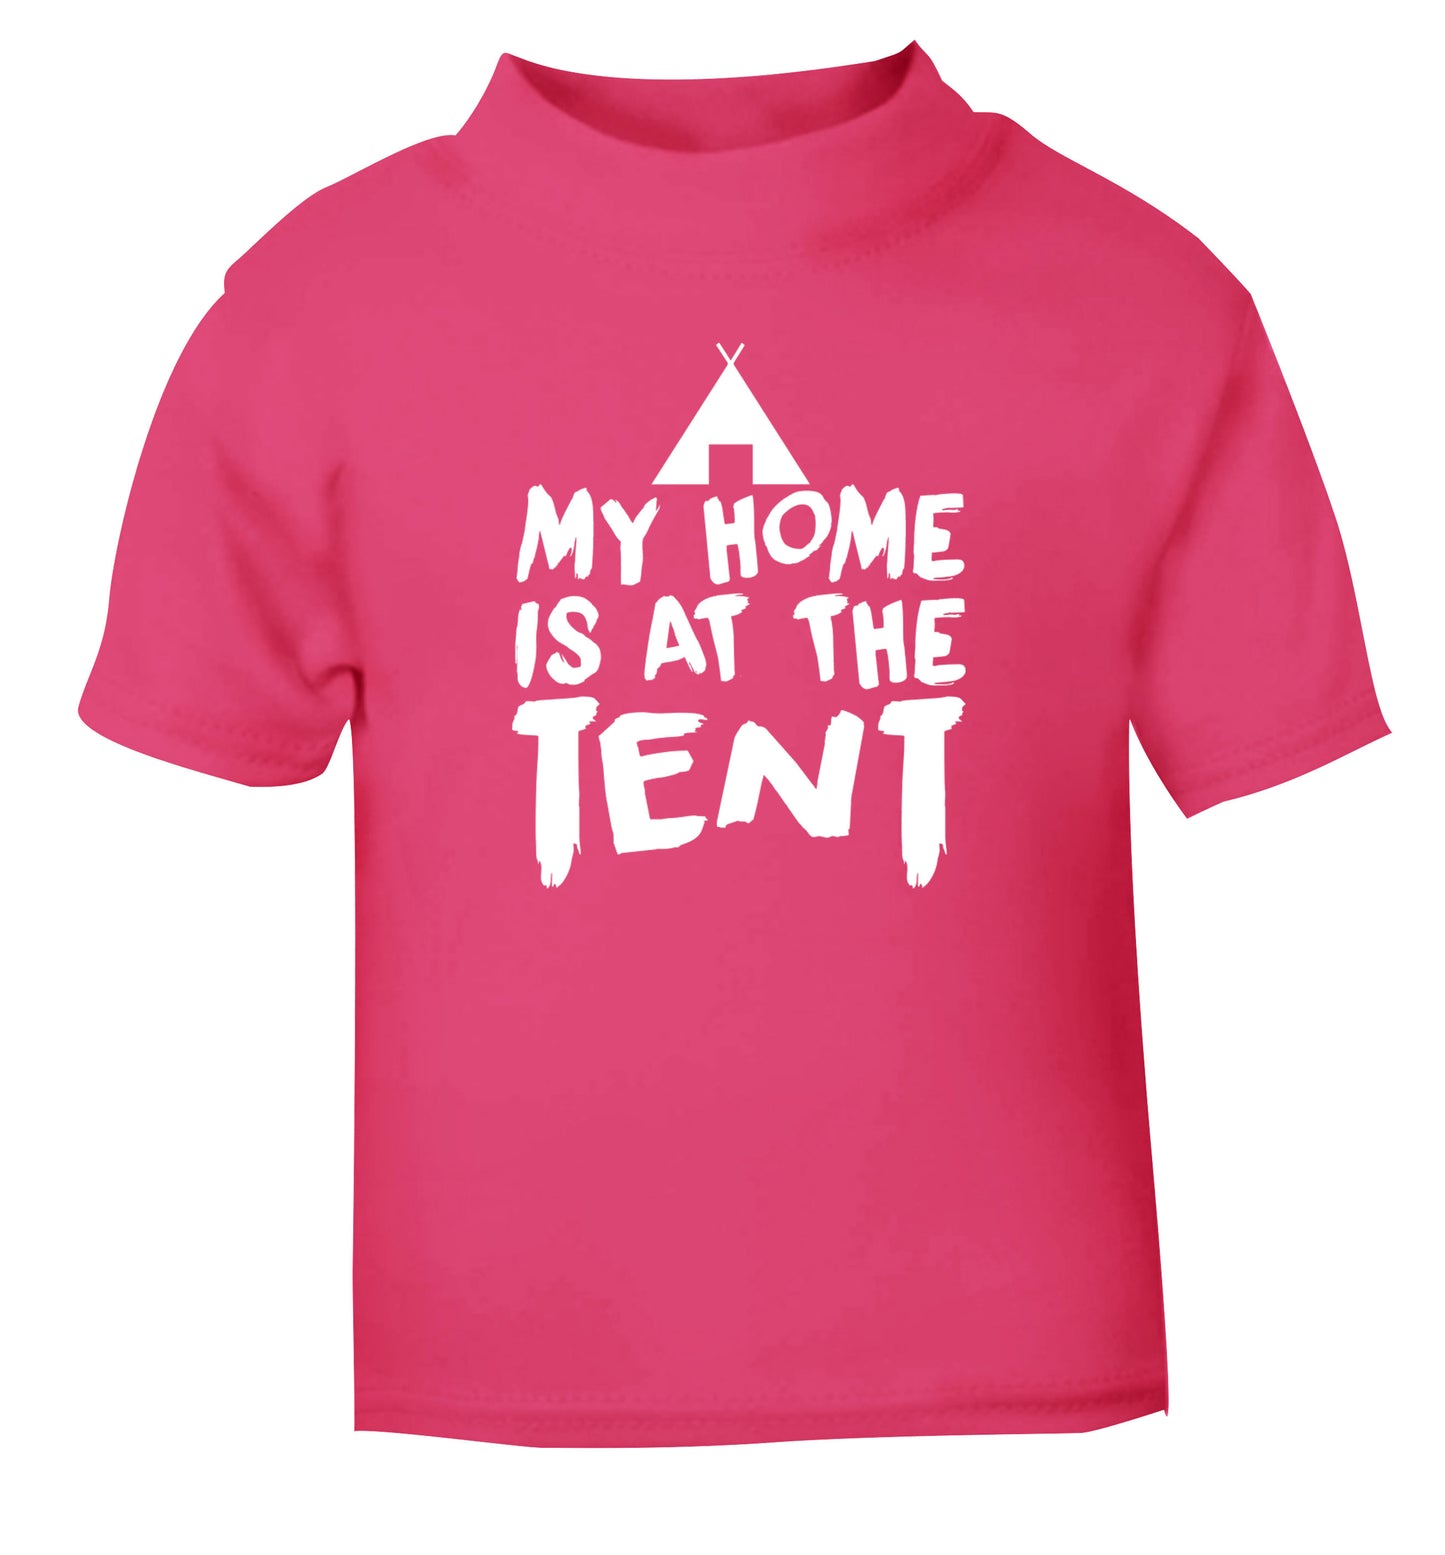 My home is at the tent pink Baby Toddler Tshirt 2 Years